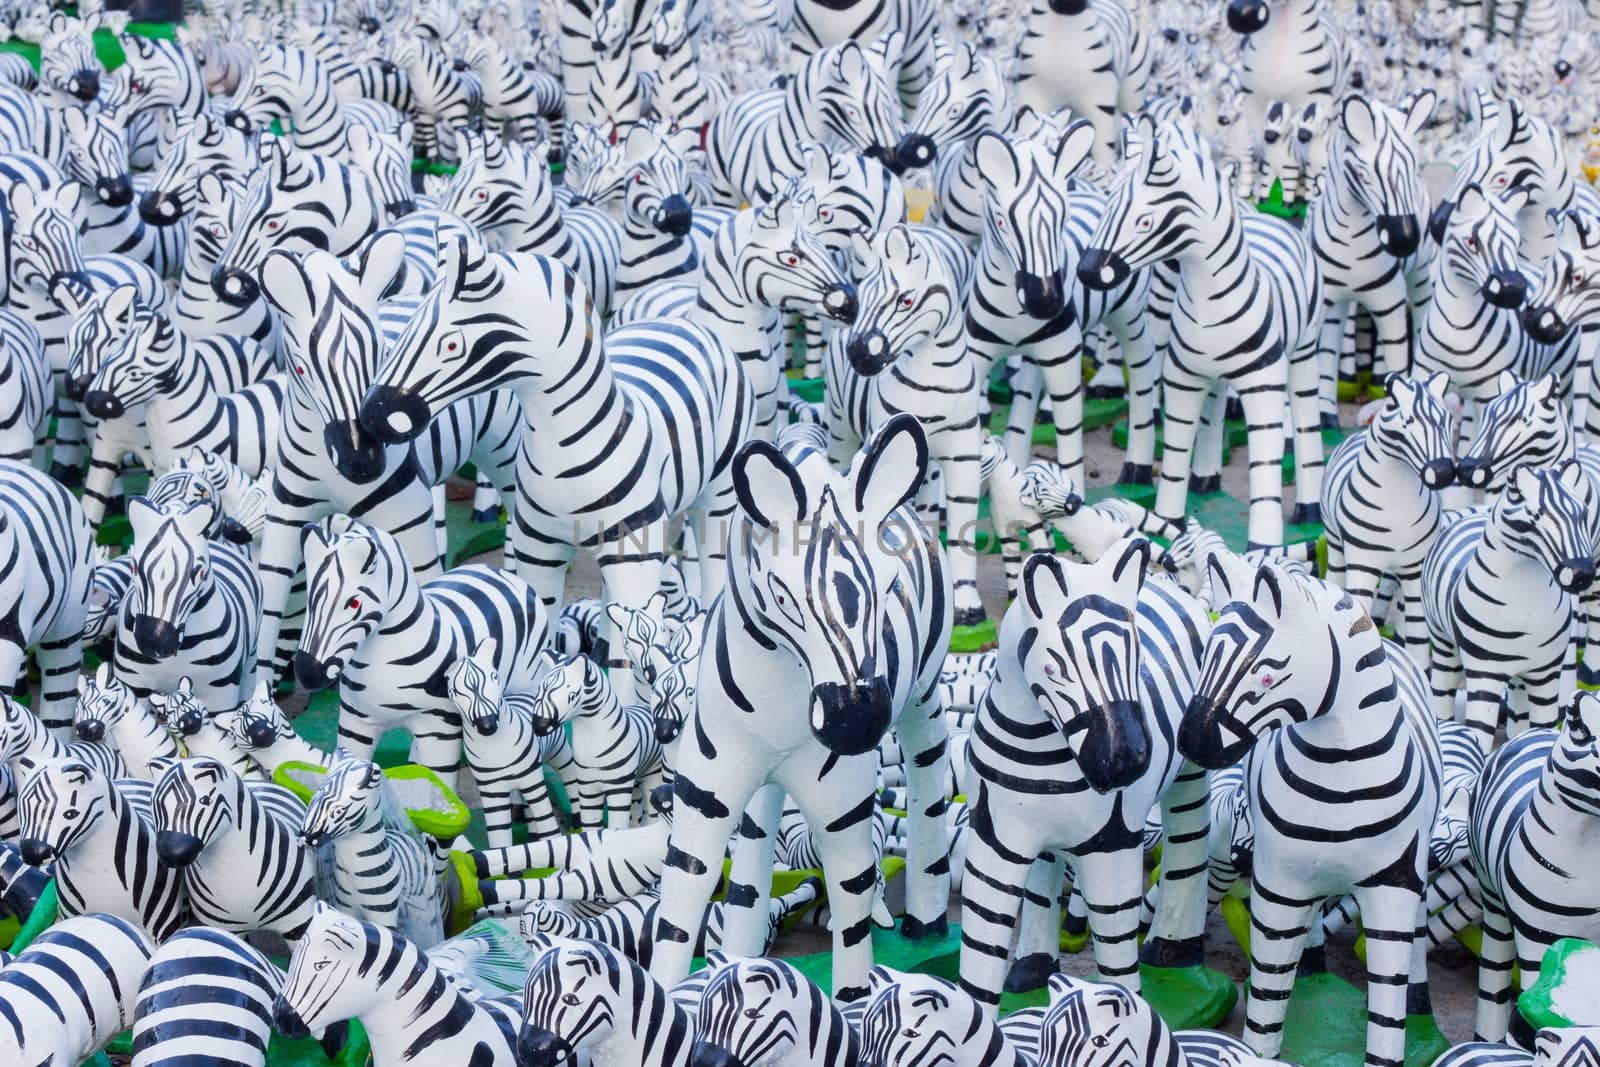 Zebra statues with black and white lines as background